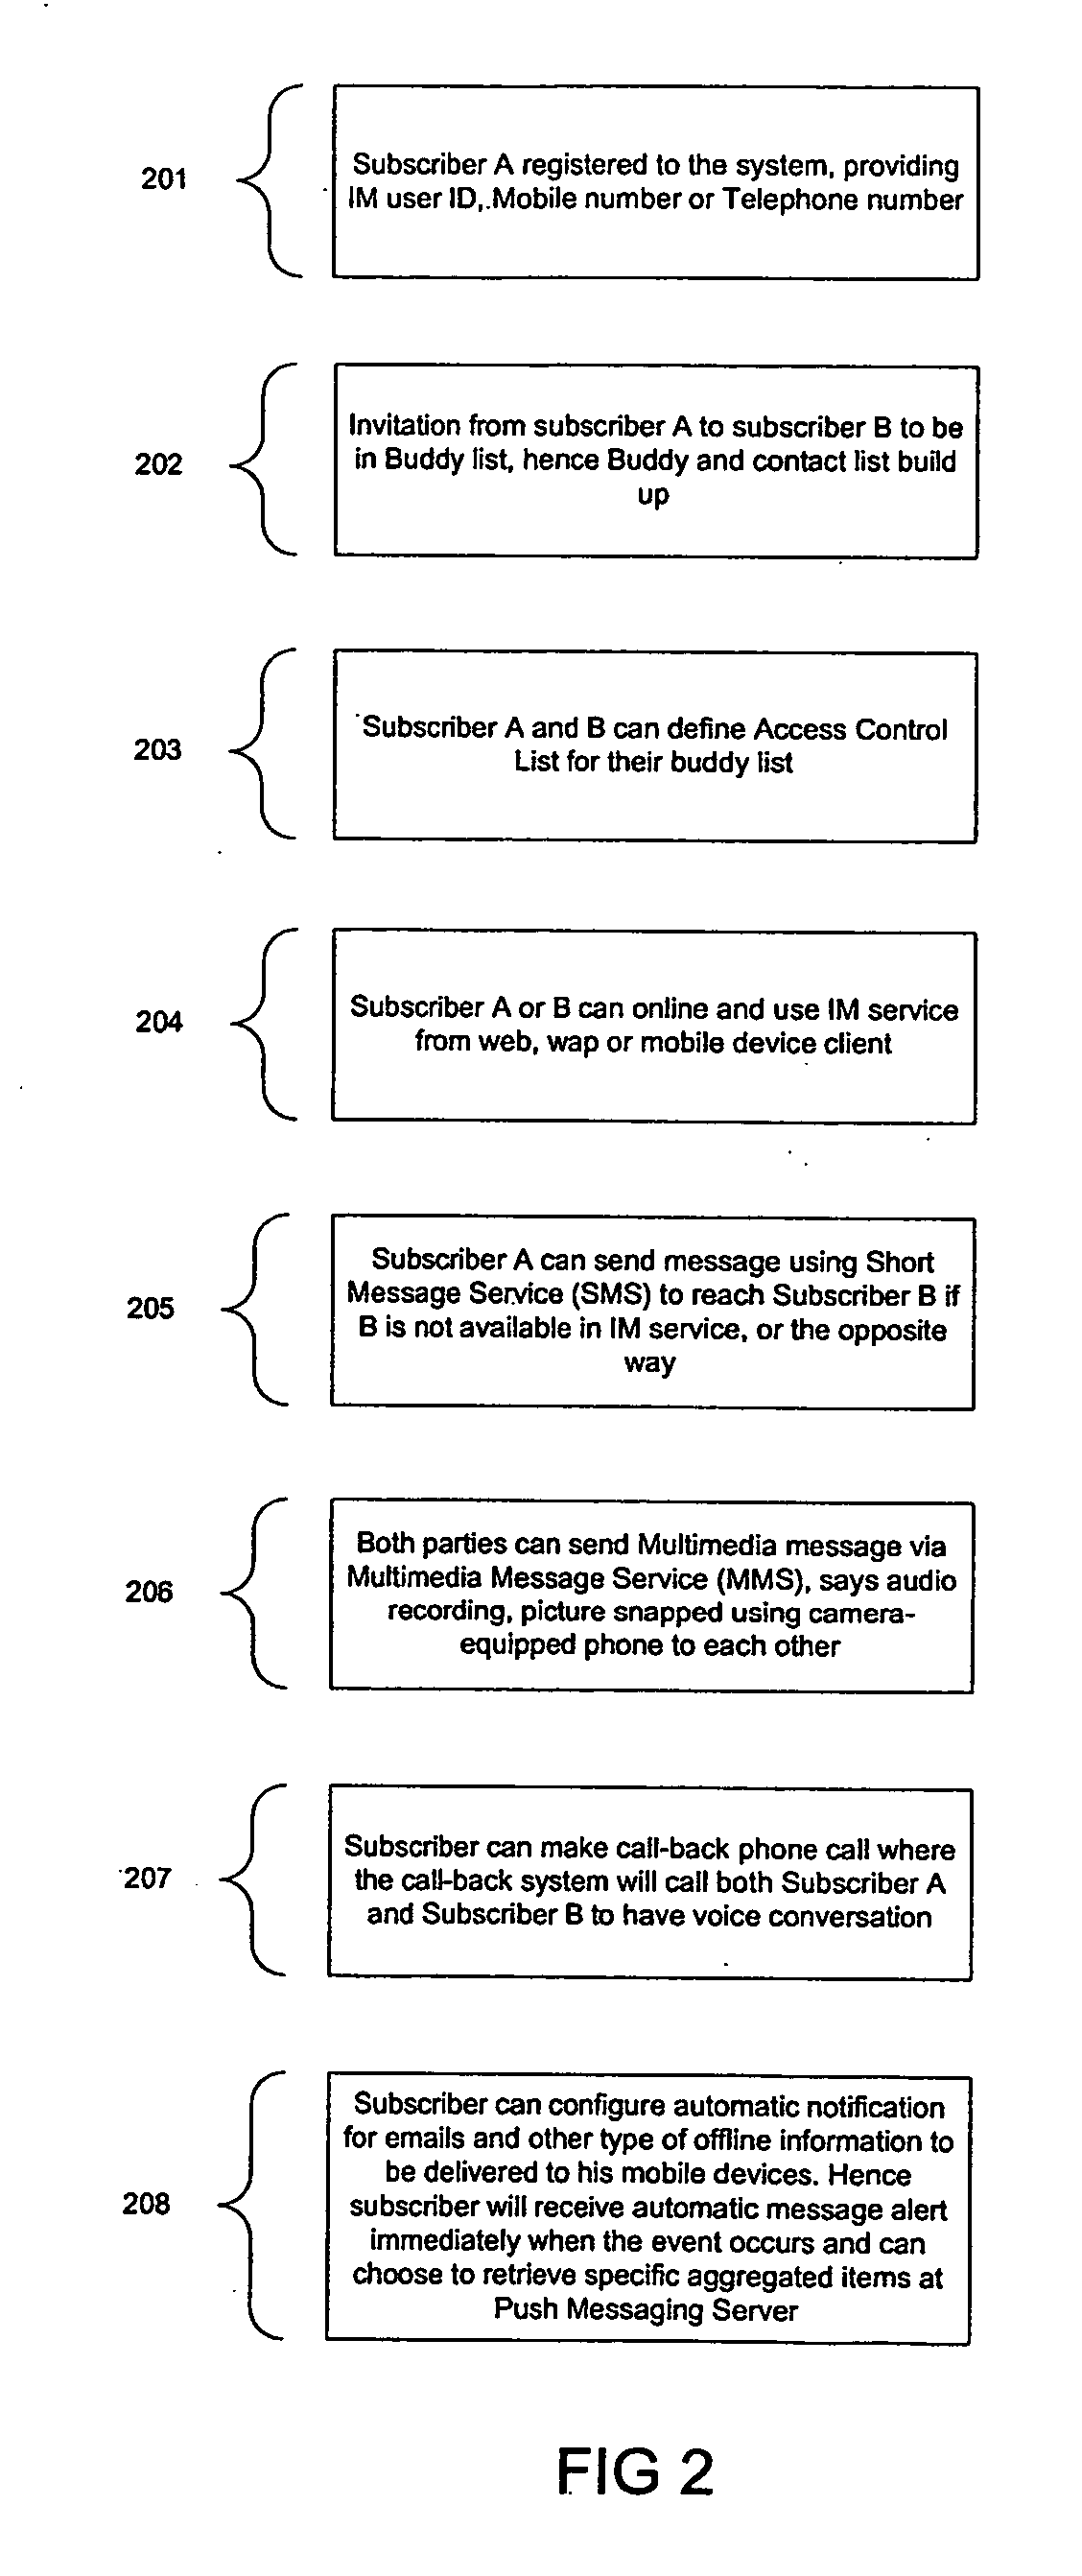 Method and system for integrated communications with access control list, automatic notification and telephony services